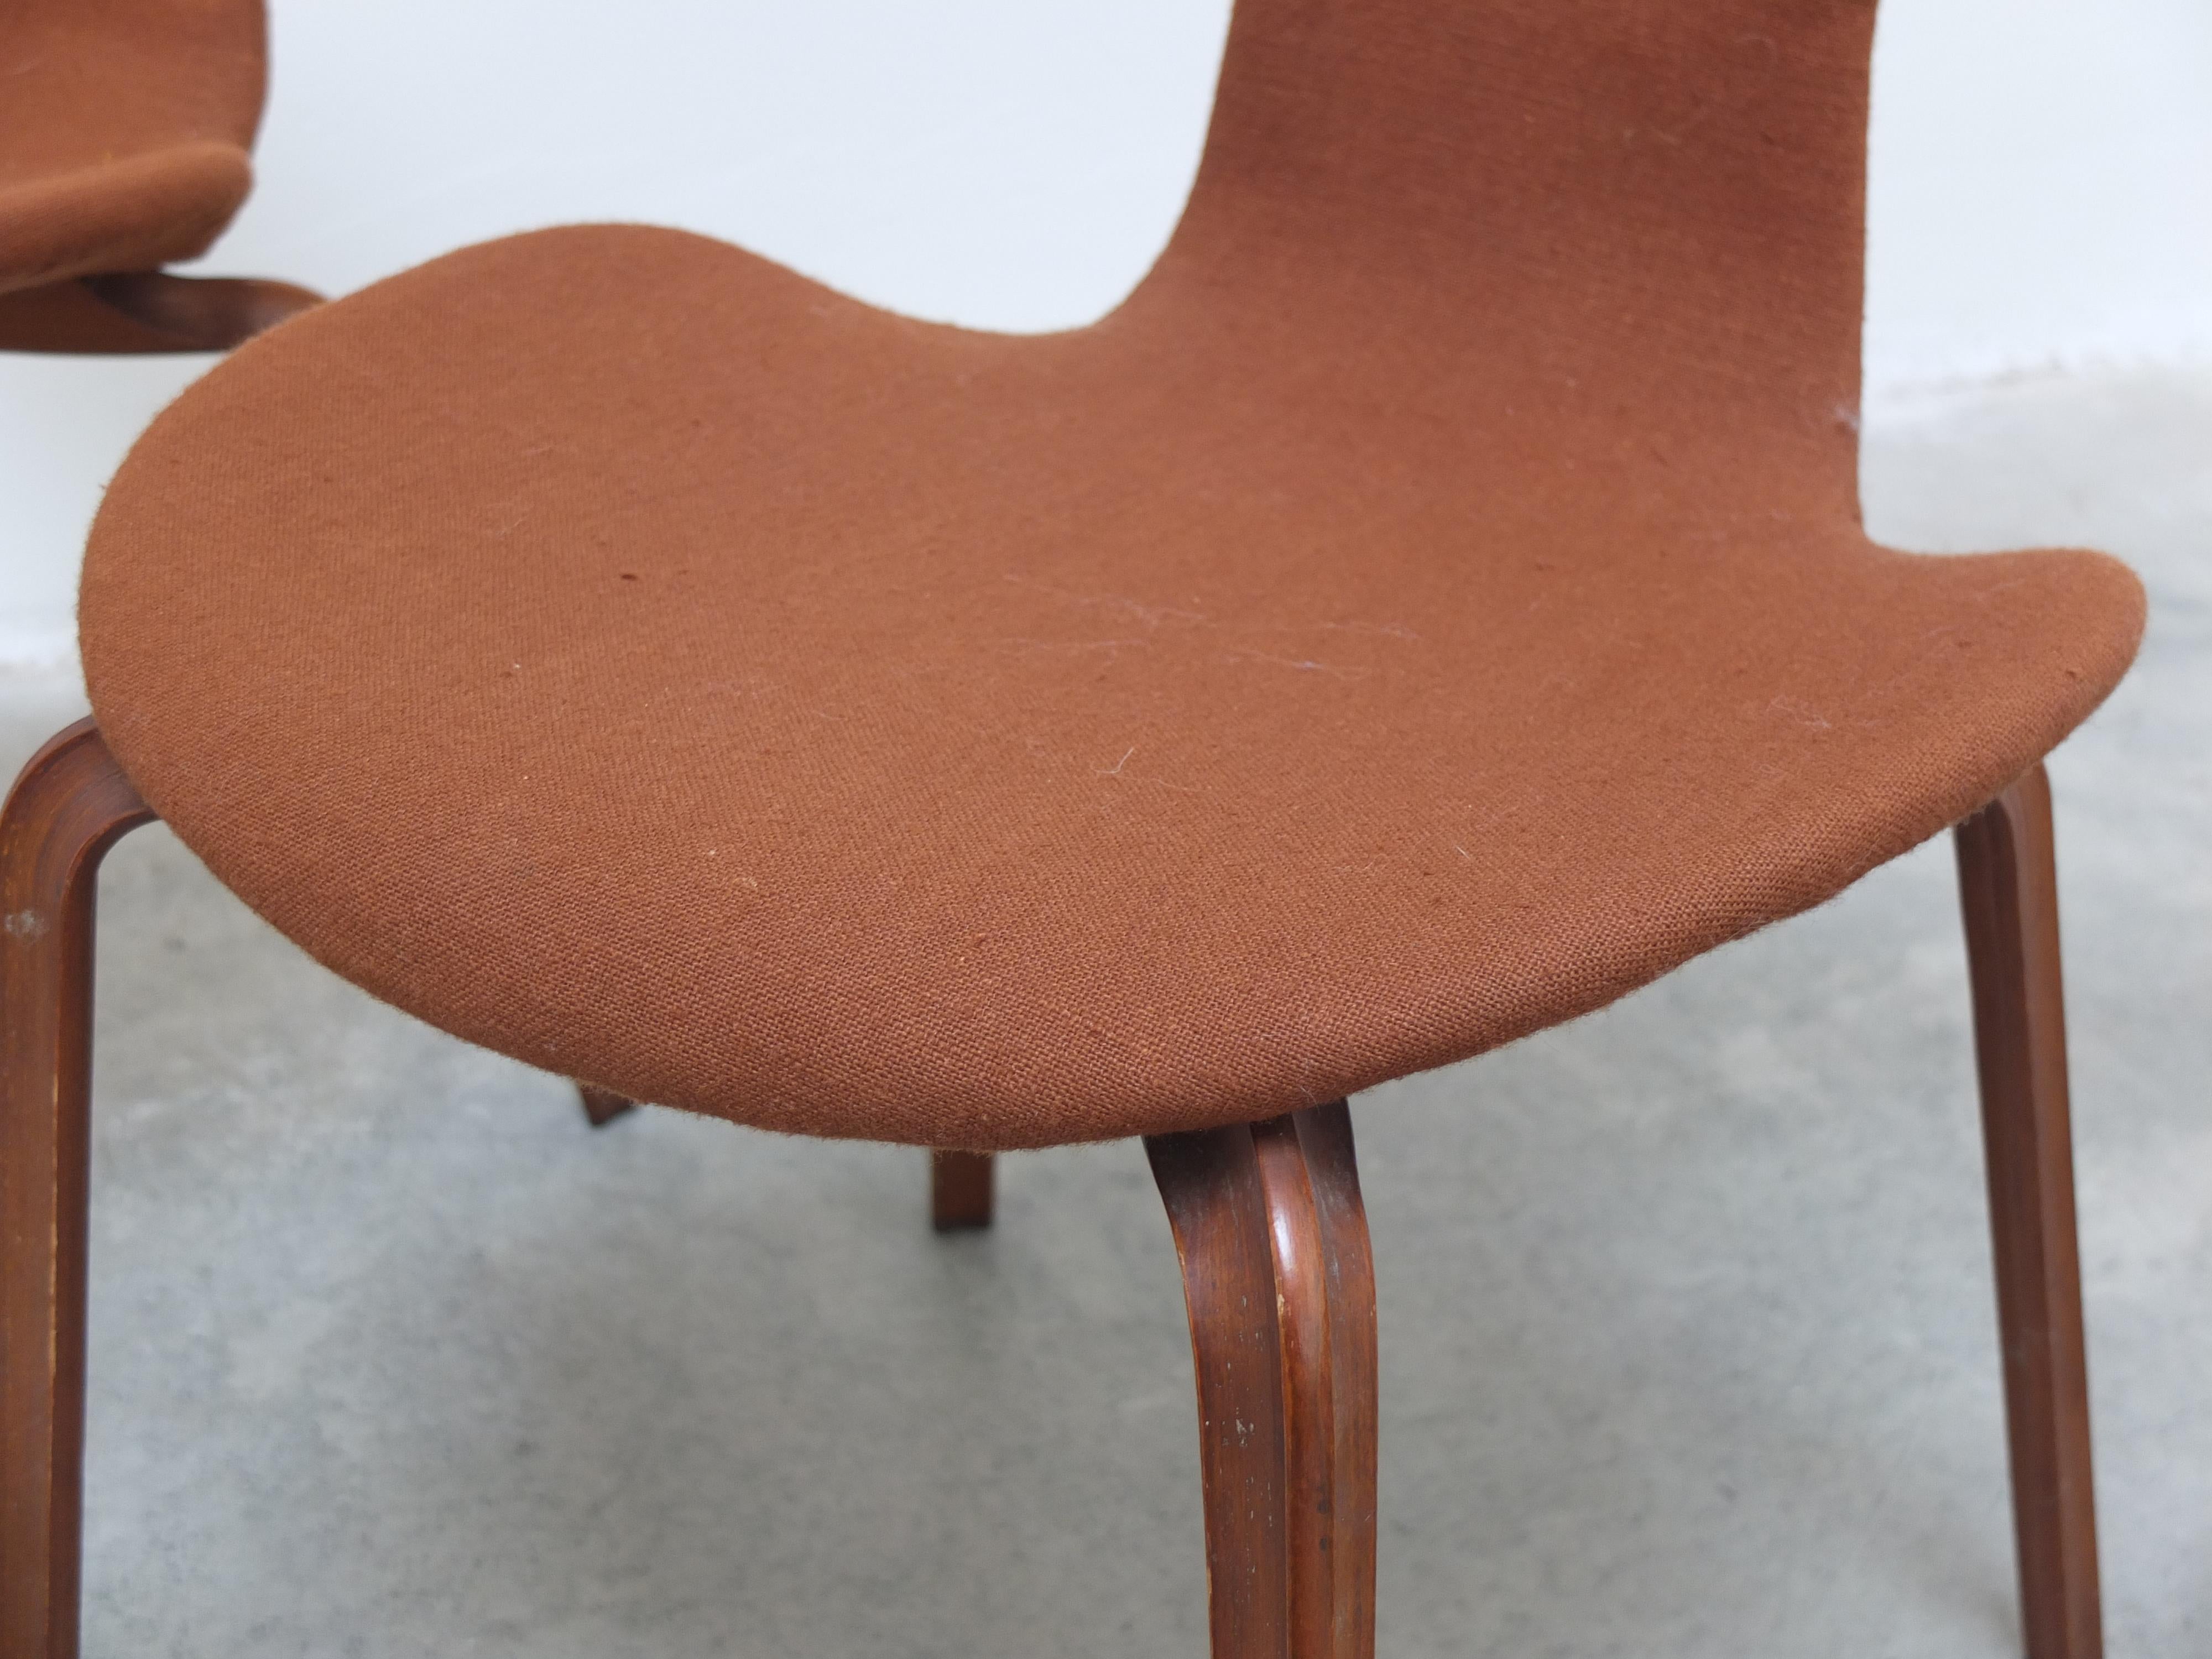 Fabric Set of 4 1st Edition 'Grand Prix' Chairs by Arne Jacobsen for Fritz Hansen, 1957 For Sale